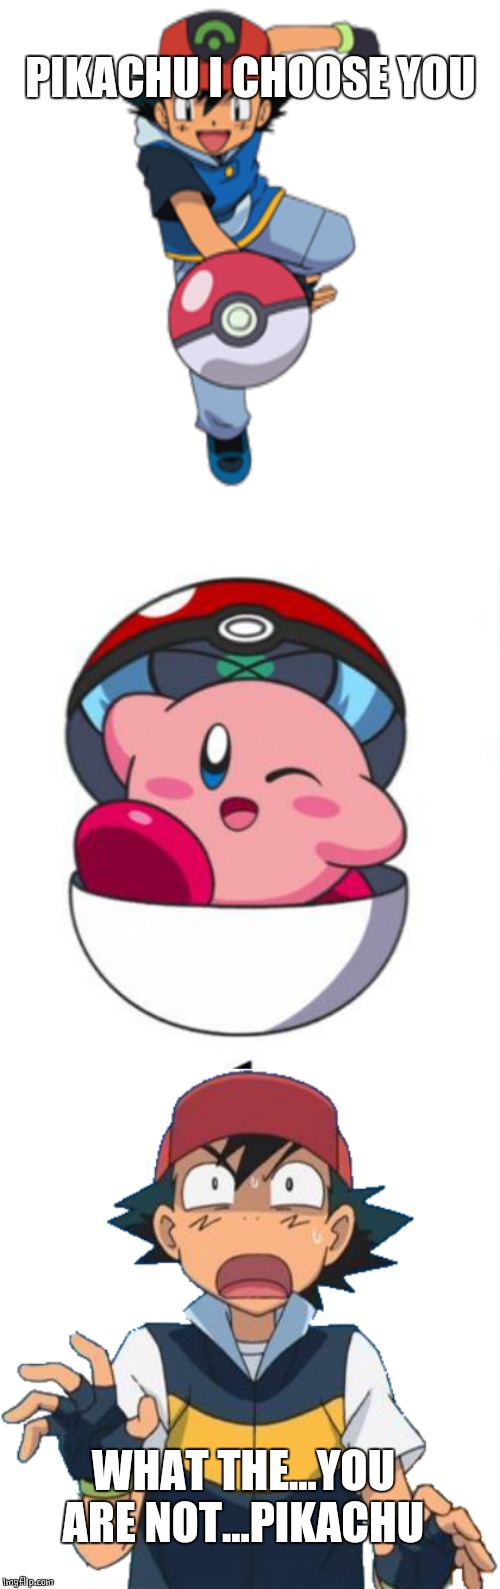 KIRBY? | PIKACHU I CHOOSE YOU; WHAT THE...YOU ARE NOT...PIKACHU | image tagged in pokemon,kirby,ash ketchum,anime,anime meme | made w/ Imgflip meme maker